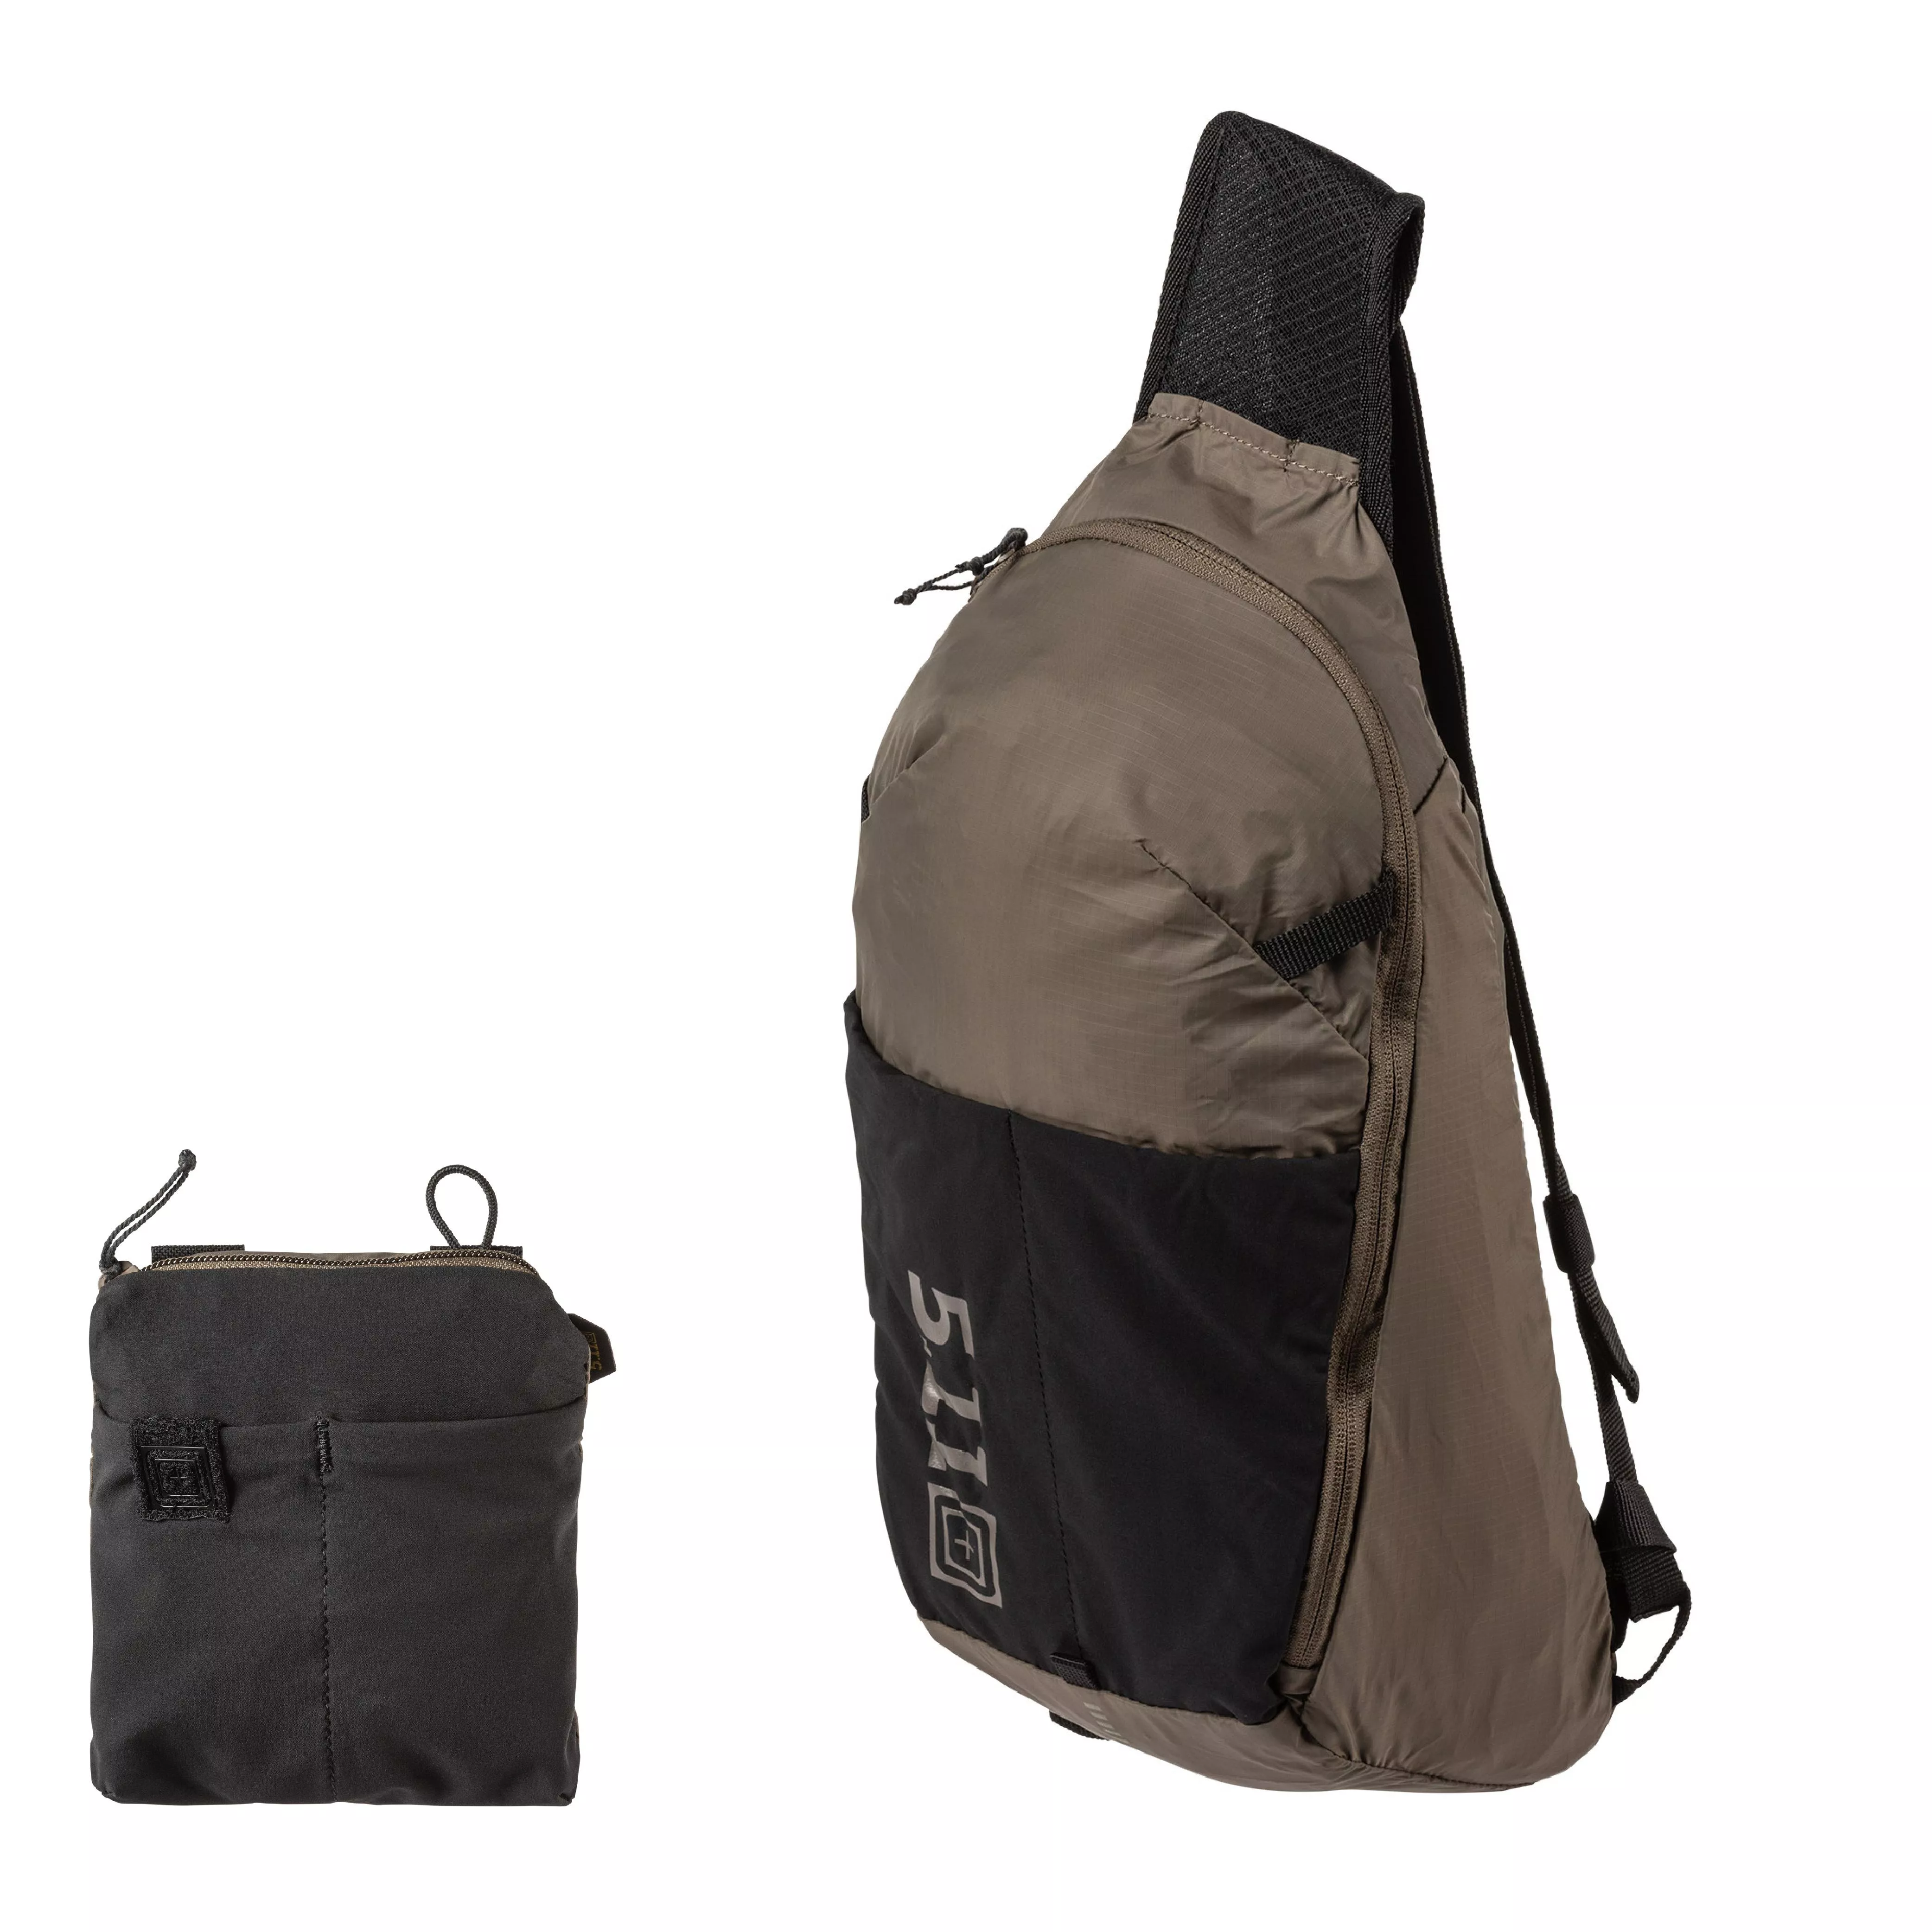 5.11-MOLLE PACKABLE SLING PACK 10L #56773